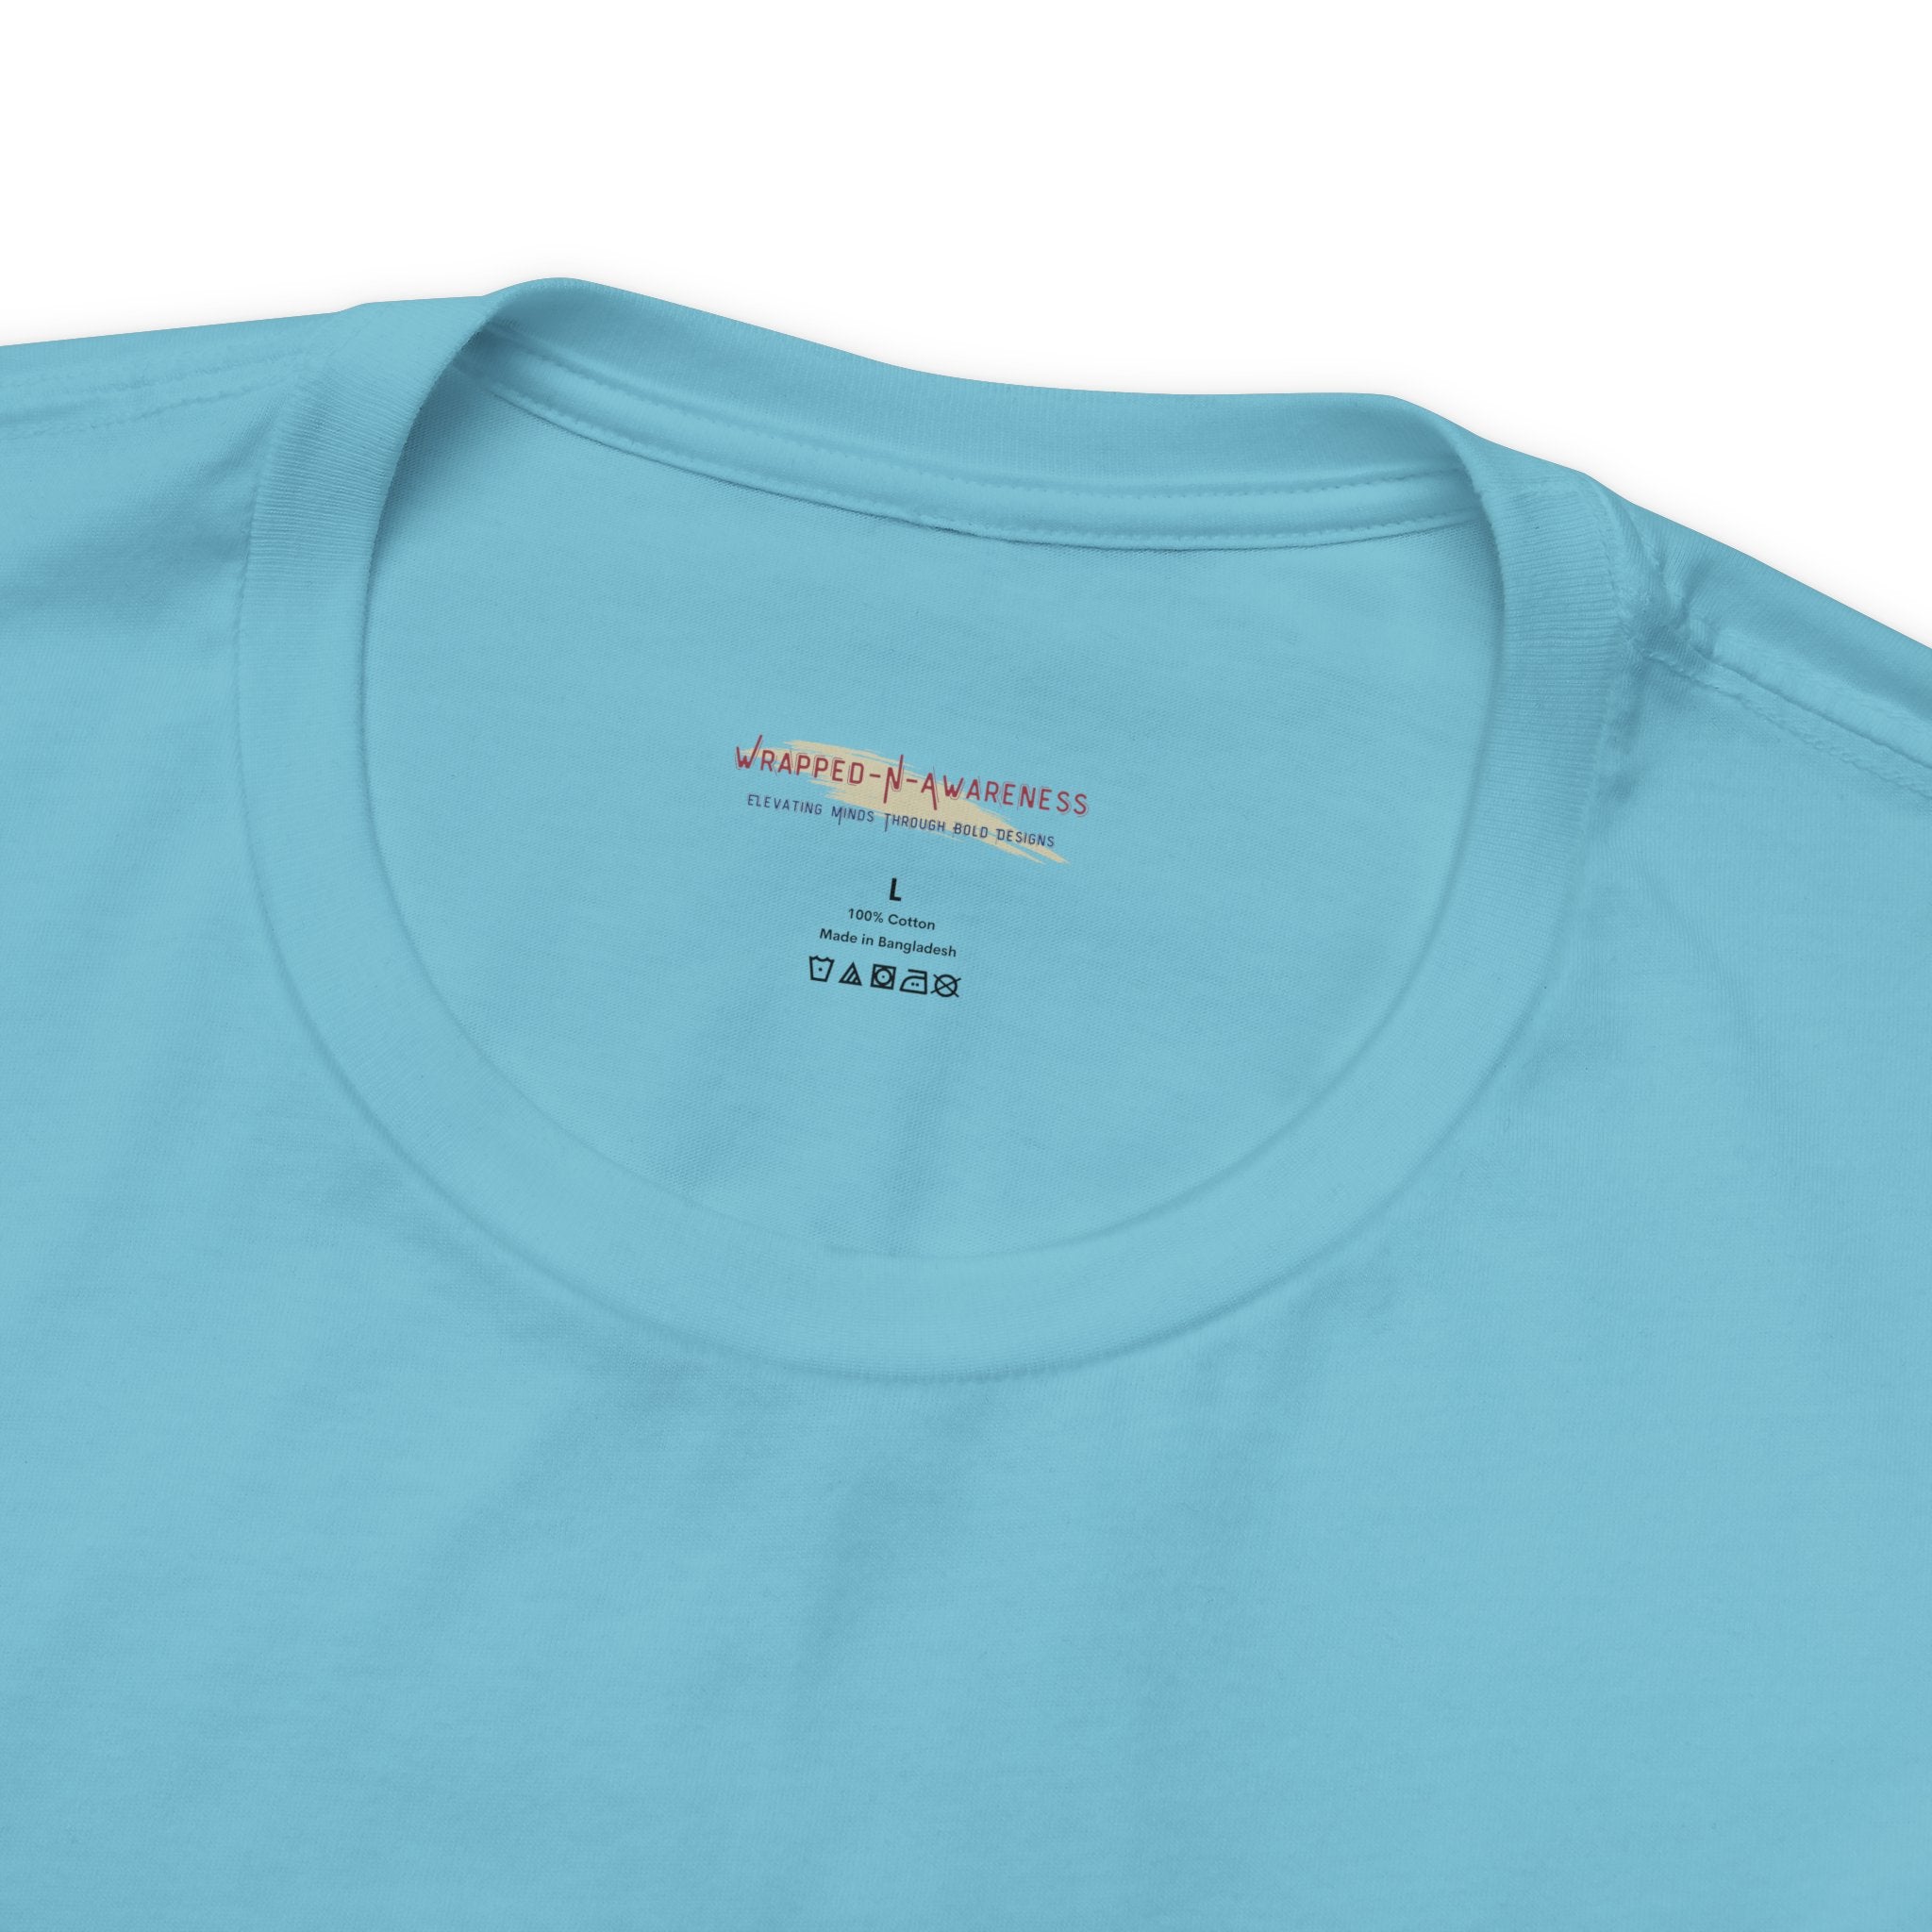 Progress Over Perfection Tee - Bella+Canvas 3001 Yellow Airlume Cotton Bella+Canvas 3001 Crew Neckline Jersey Short Sleeve Lightweight Fabric Mental Health Support Retail Fit Tear-away Label Tee Unisex Tee T-Shirt 2456101623135923610_2048 Printify